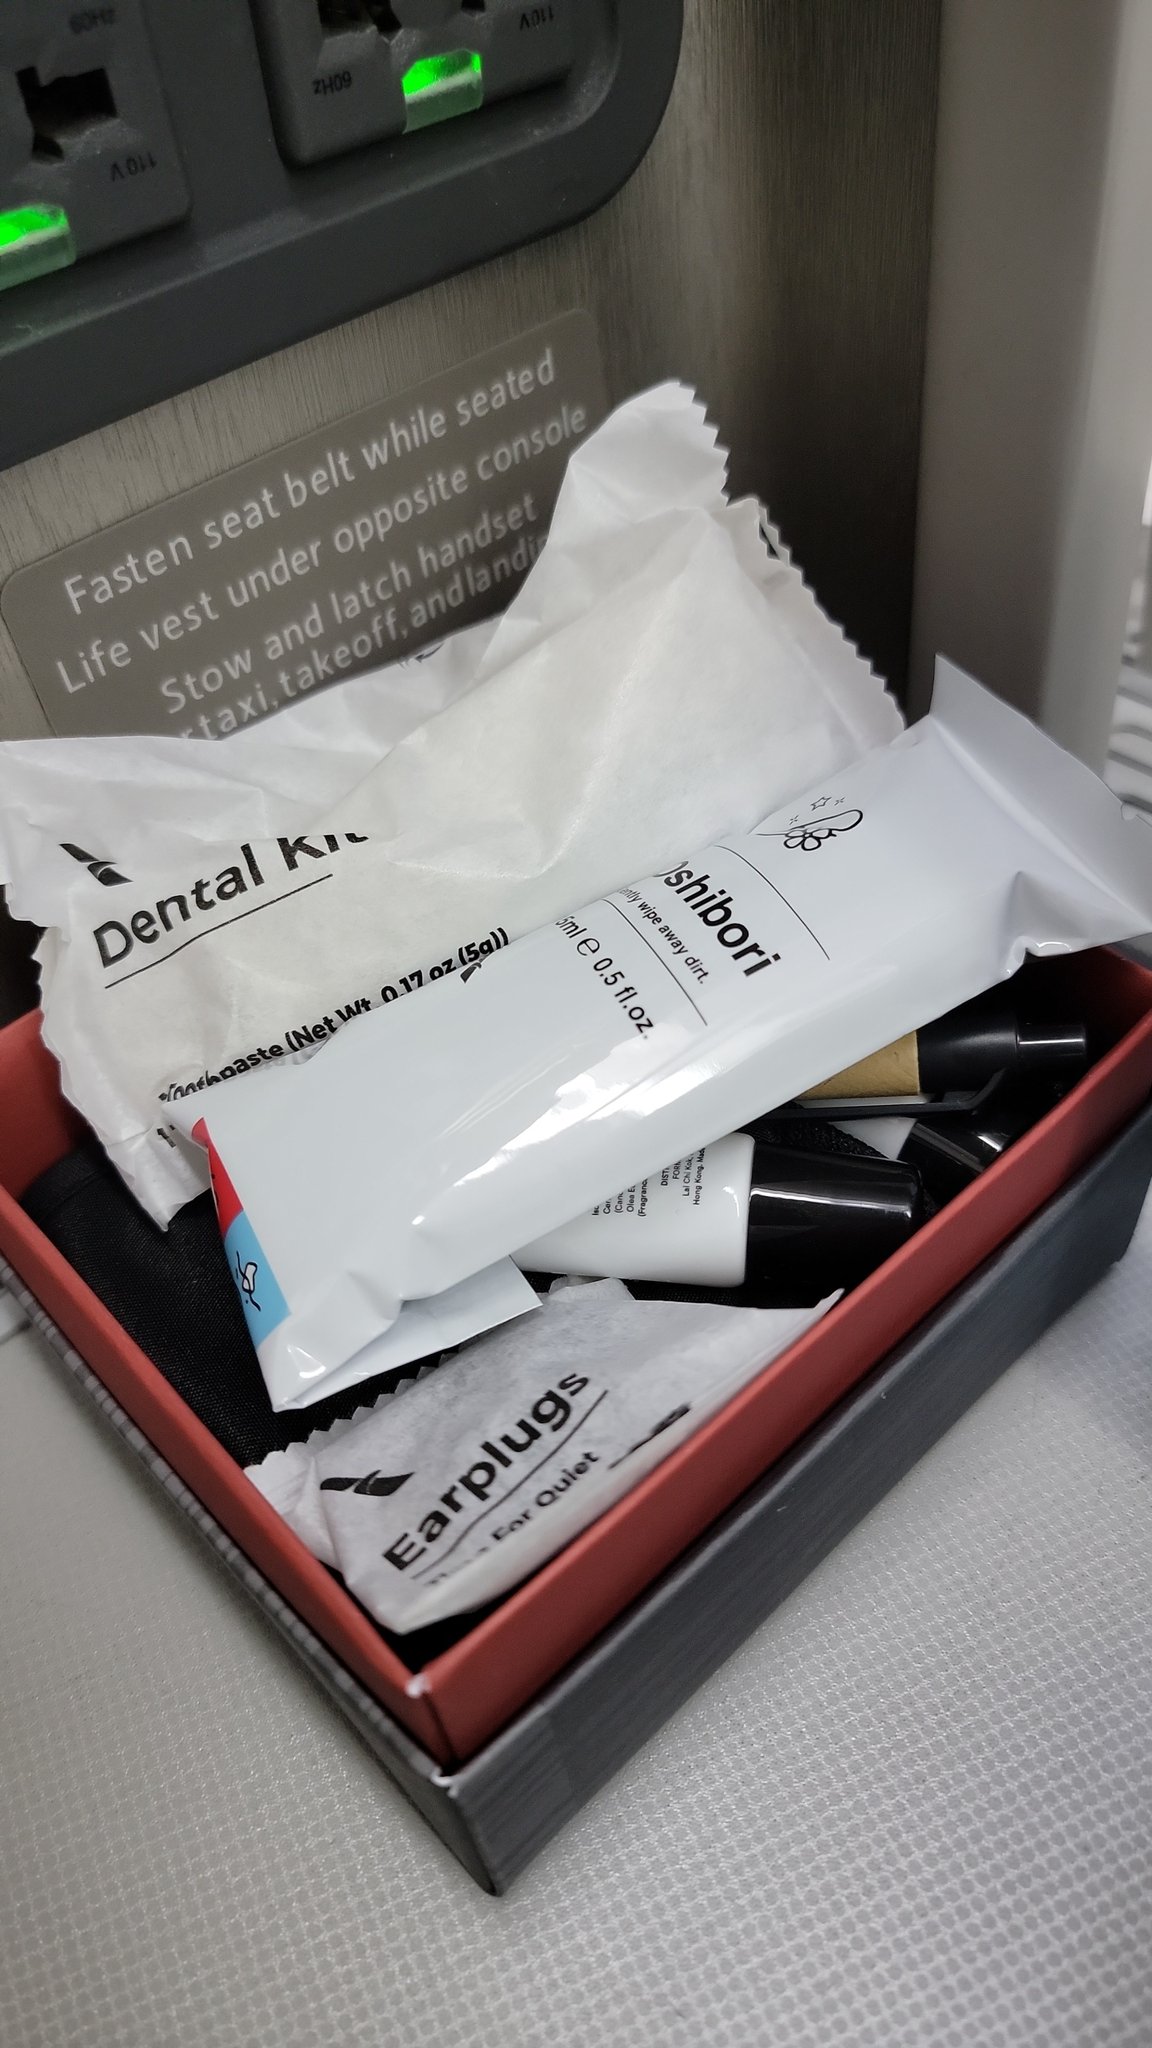 New American Airlines Business Class Amenity Kits Are Actually Just